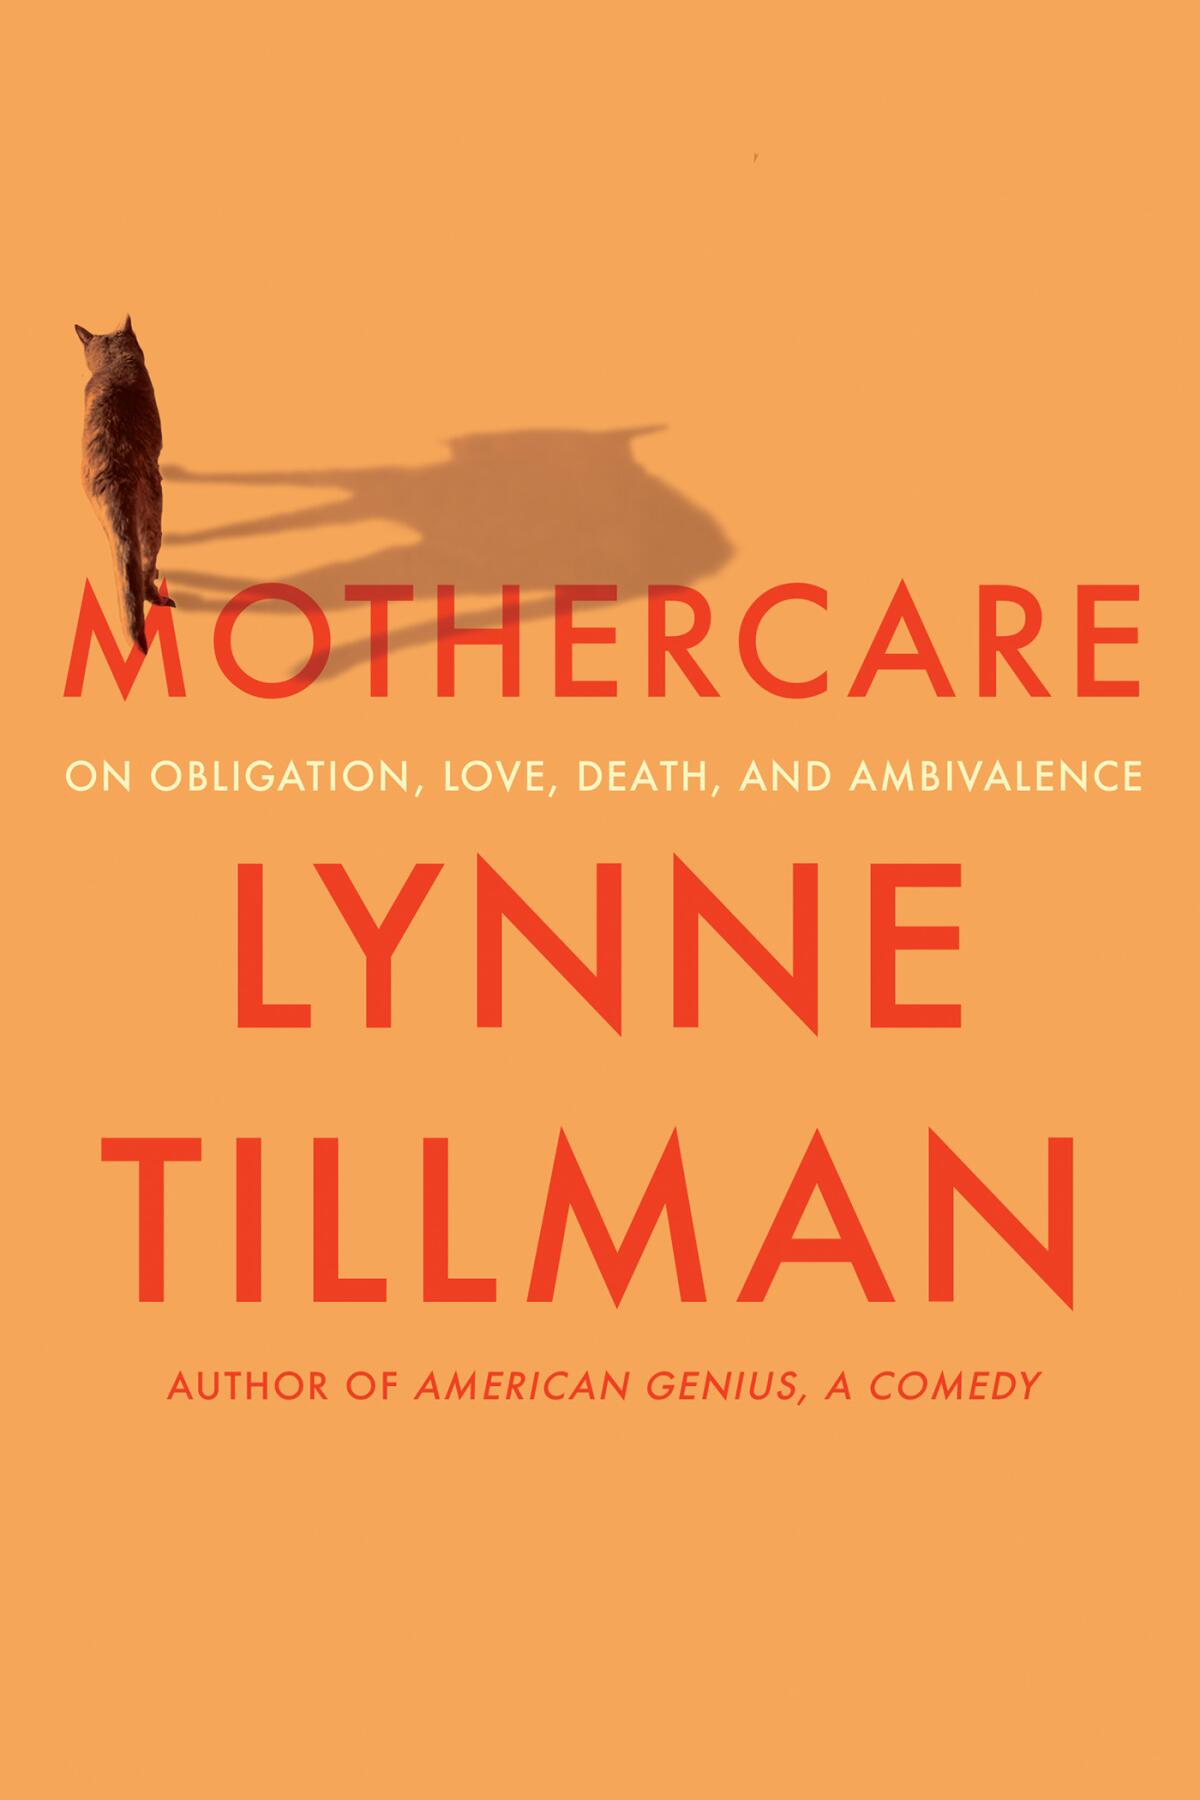 "Mothercare: On Obligation, Love, Death and Ambivalence" by Lynne Tillman